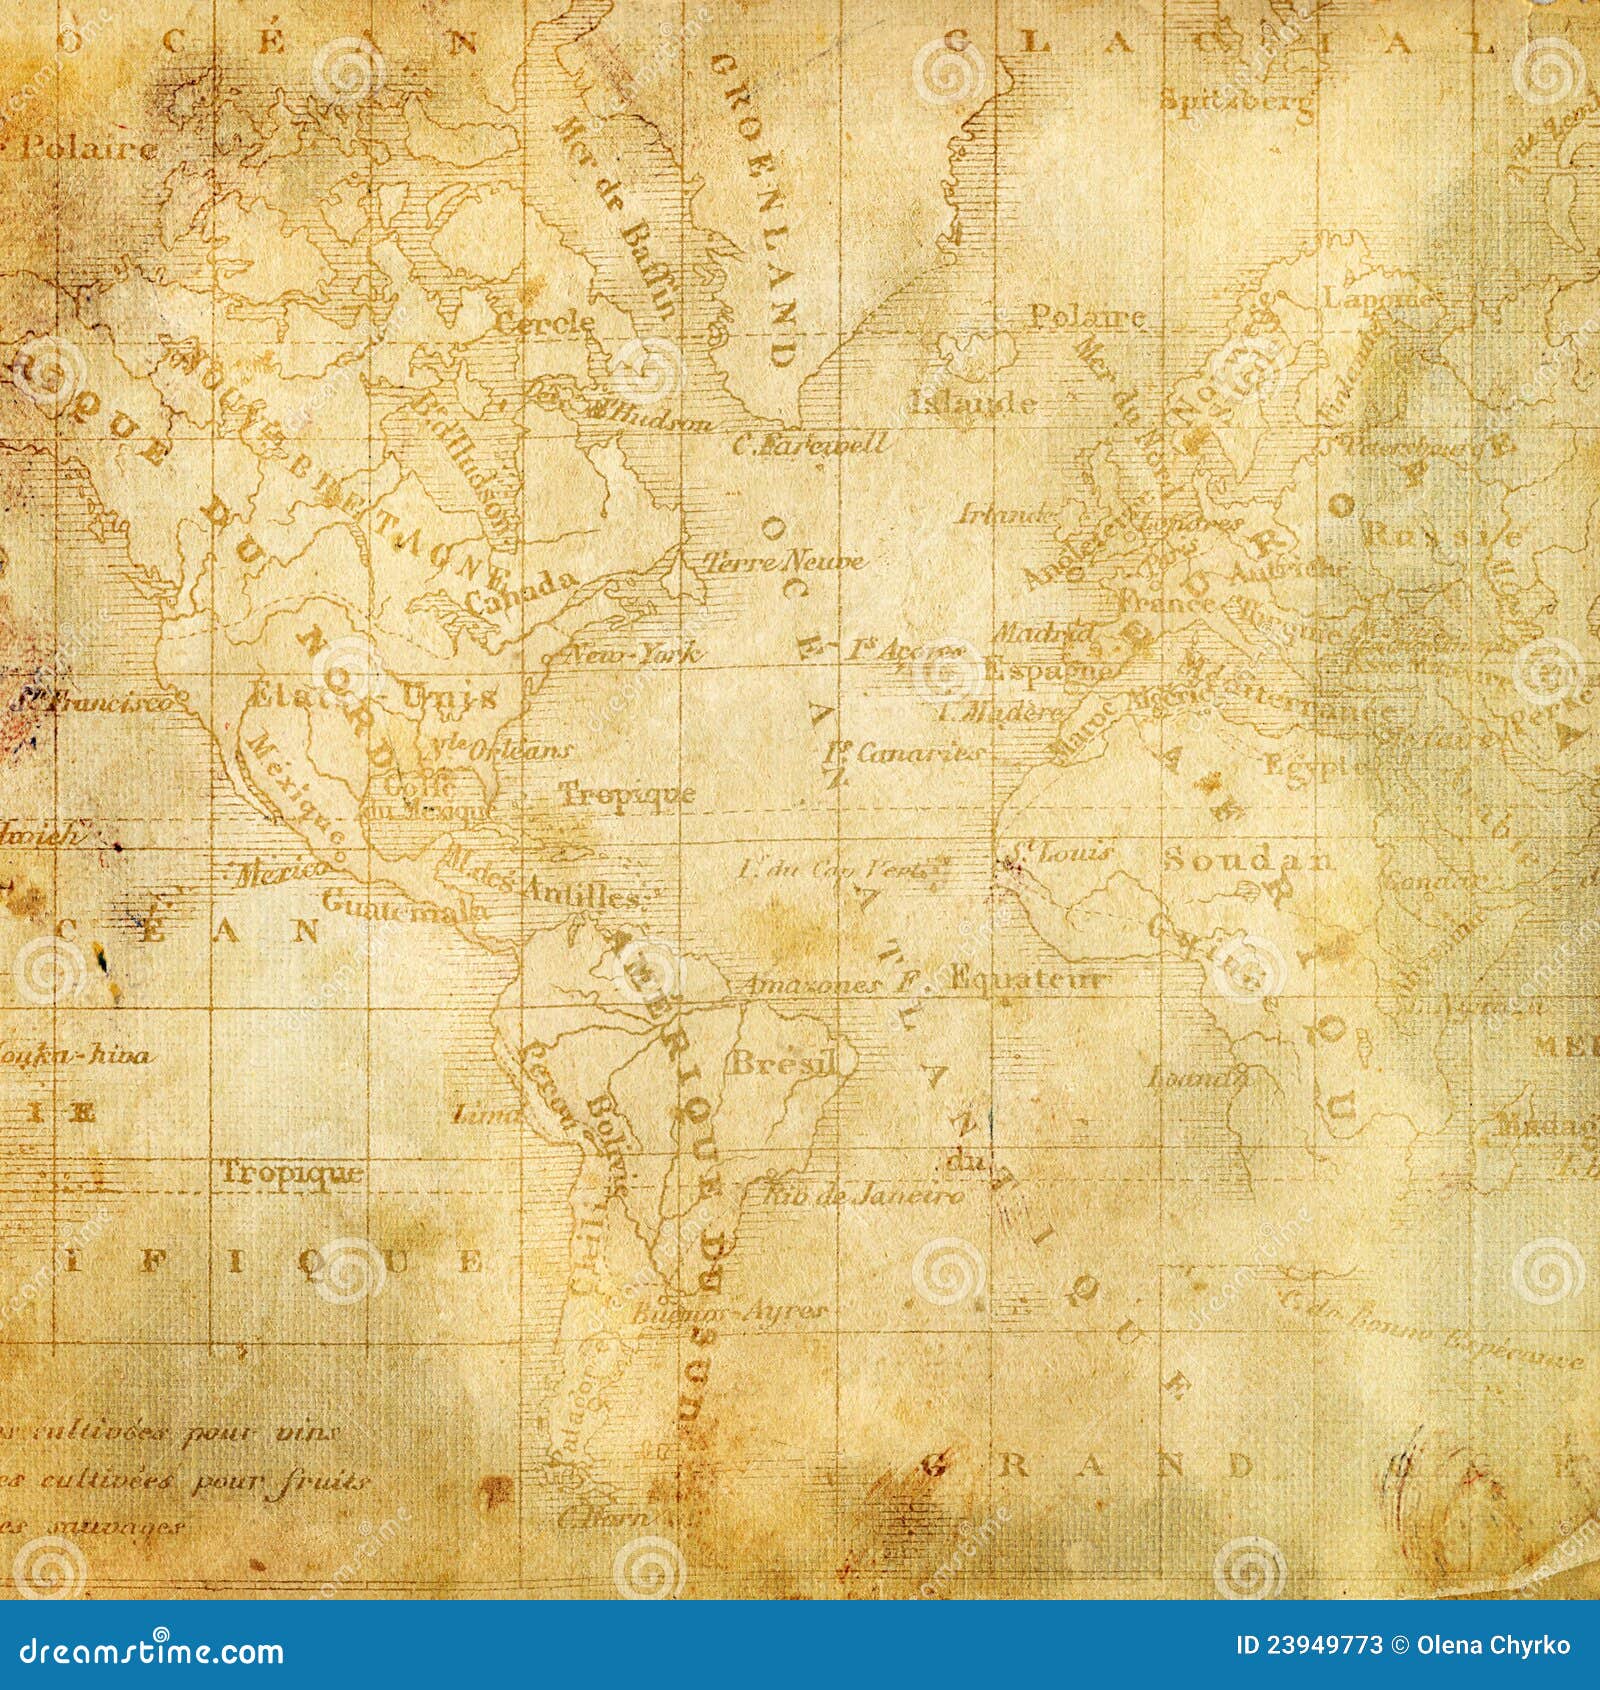 background with the old map of the americas